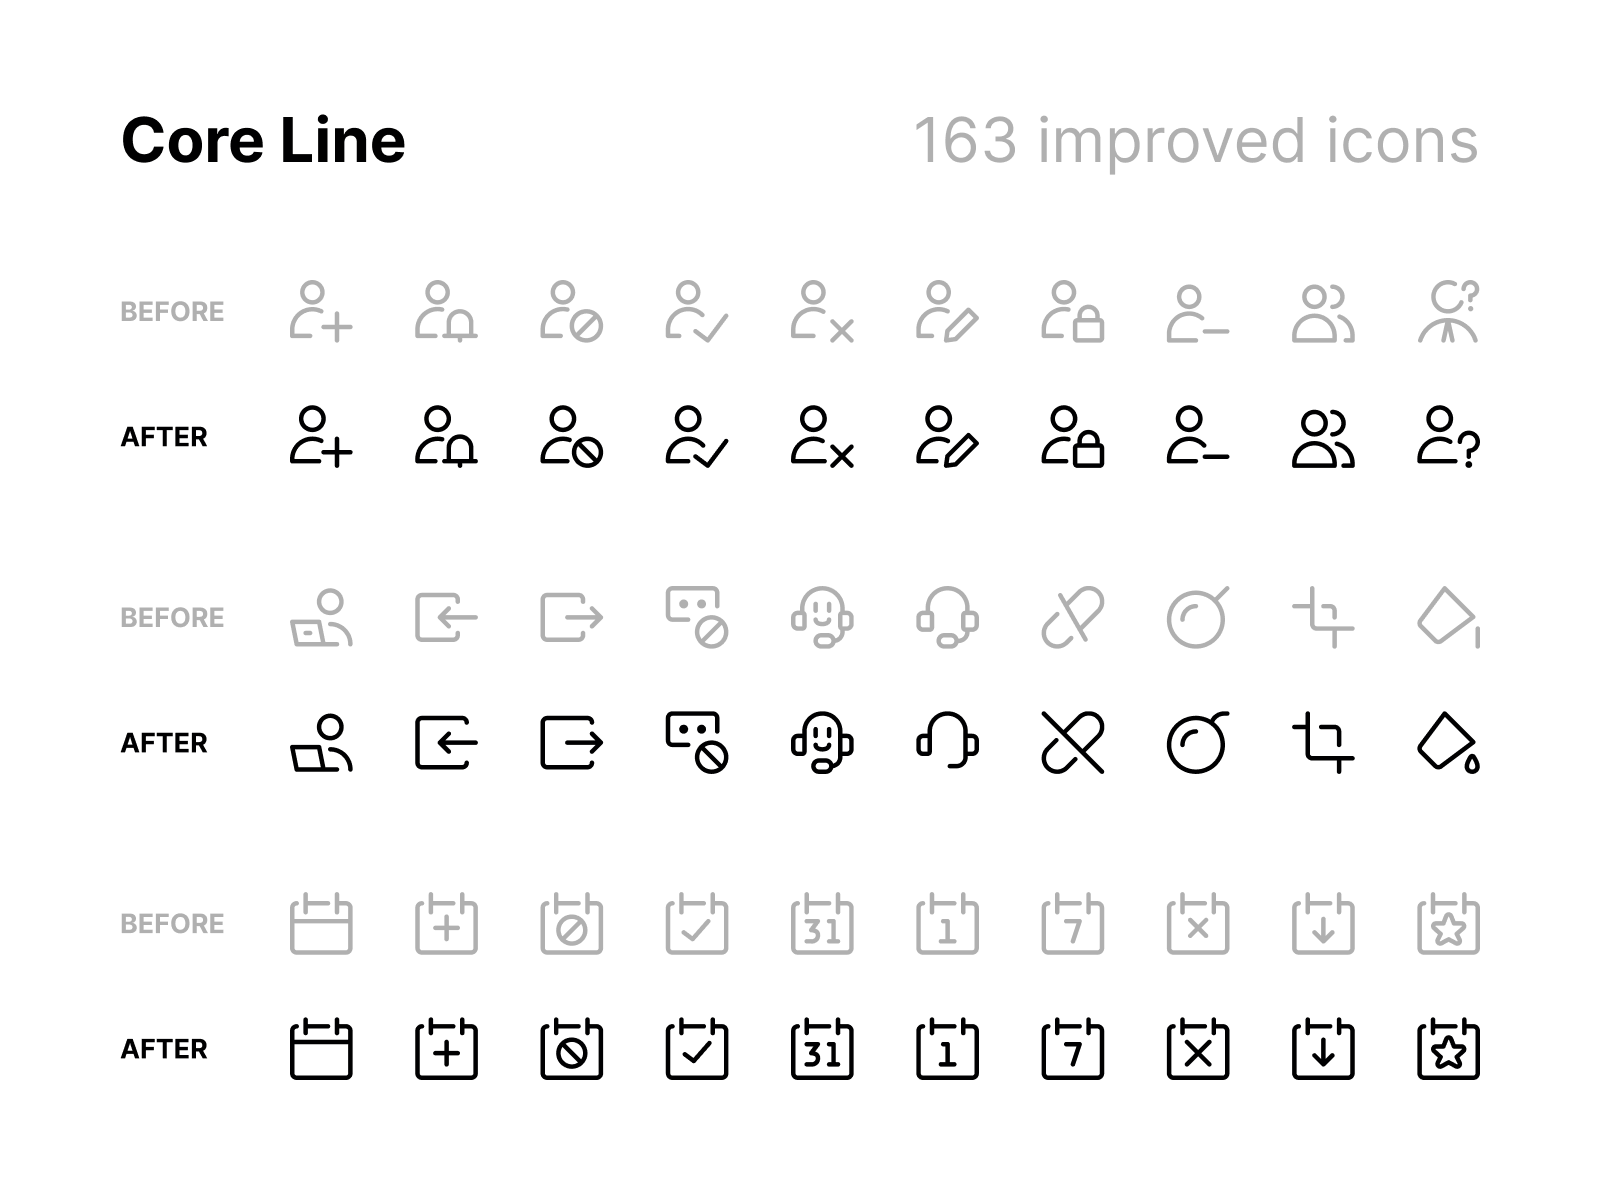 CORE - Improved icons core grid iconography icons interface pictogram set system ui vector